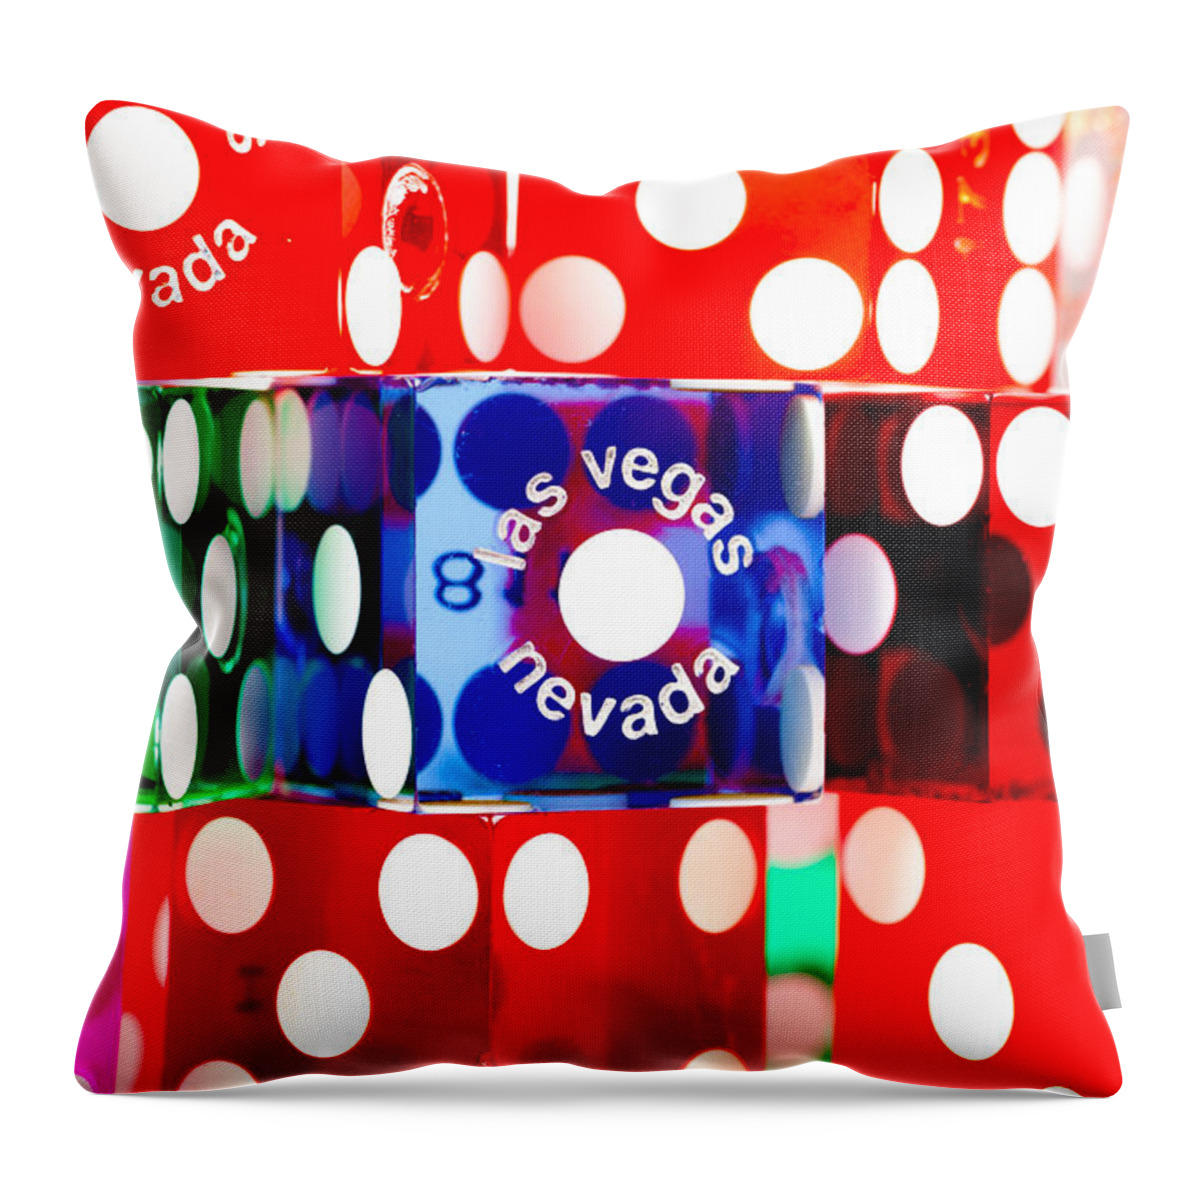 Las Vegas Throw Pillow featuring the photograph Colorful Dice by Raul Rodriguez